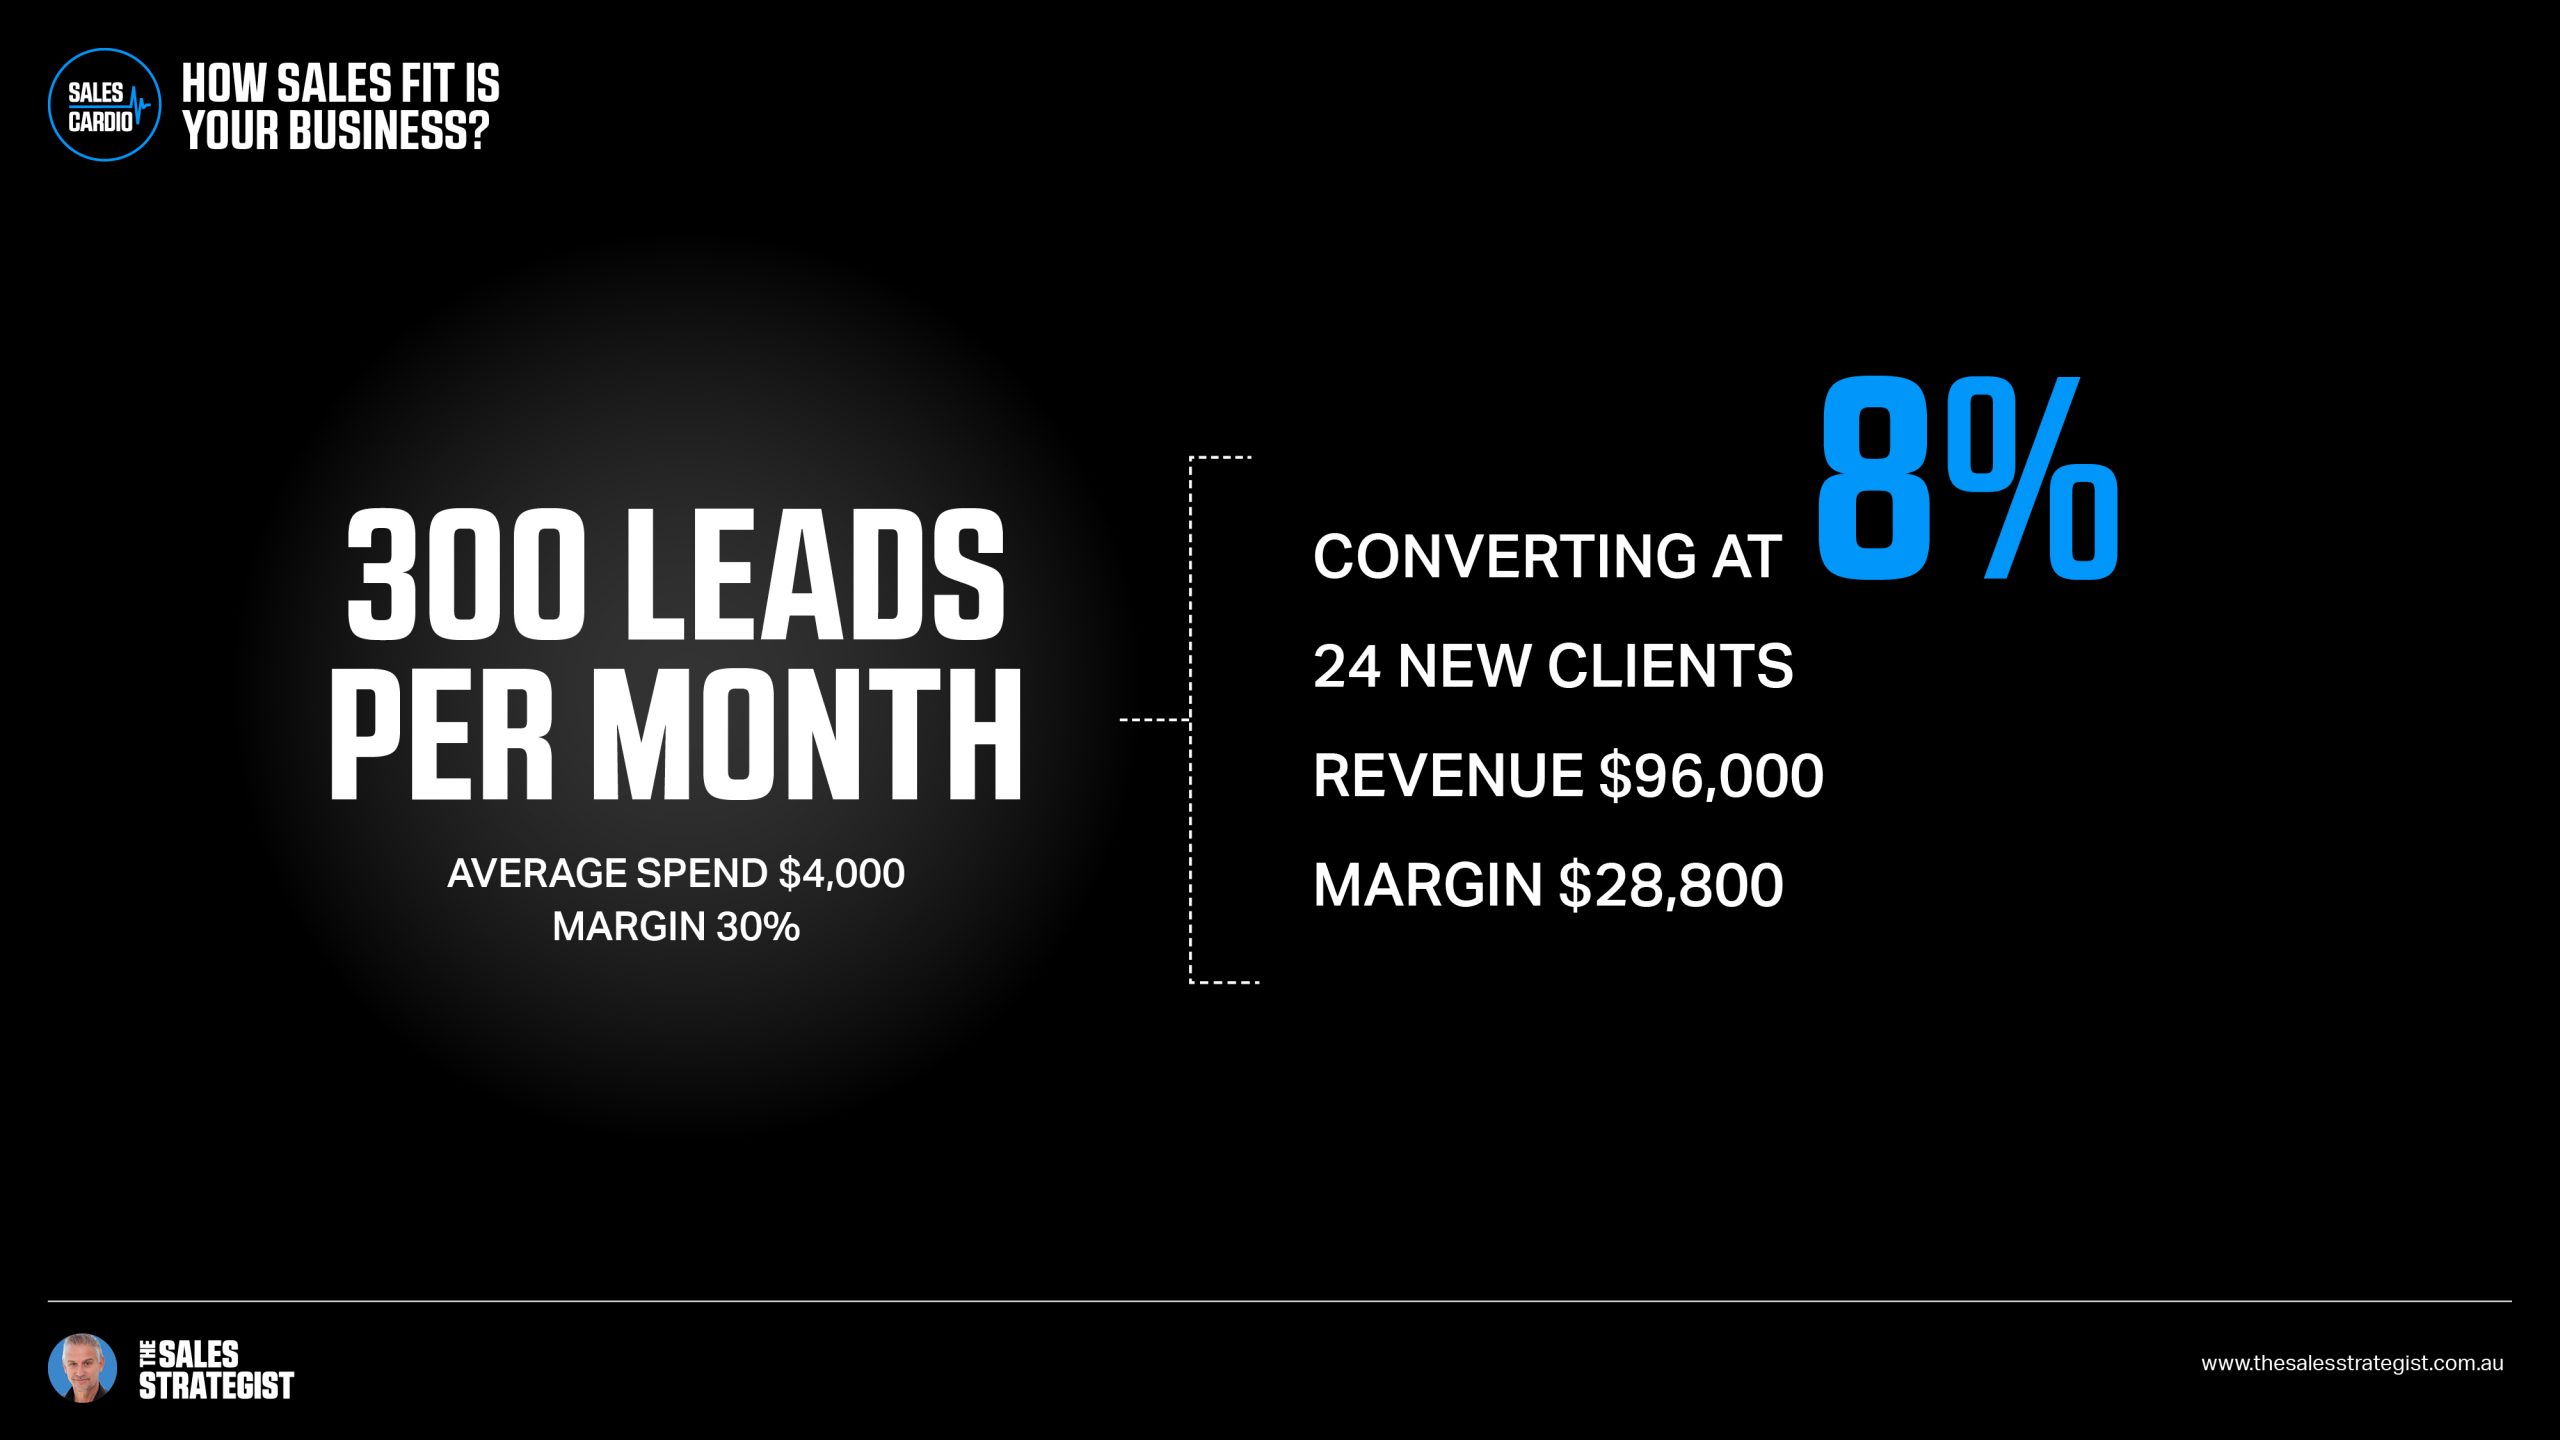 “LET’S GENERATE MORE LEADS”